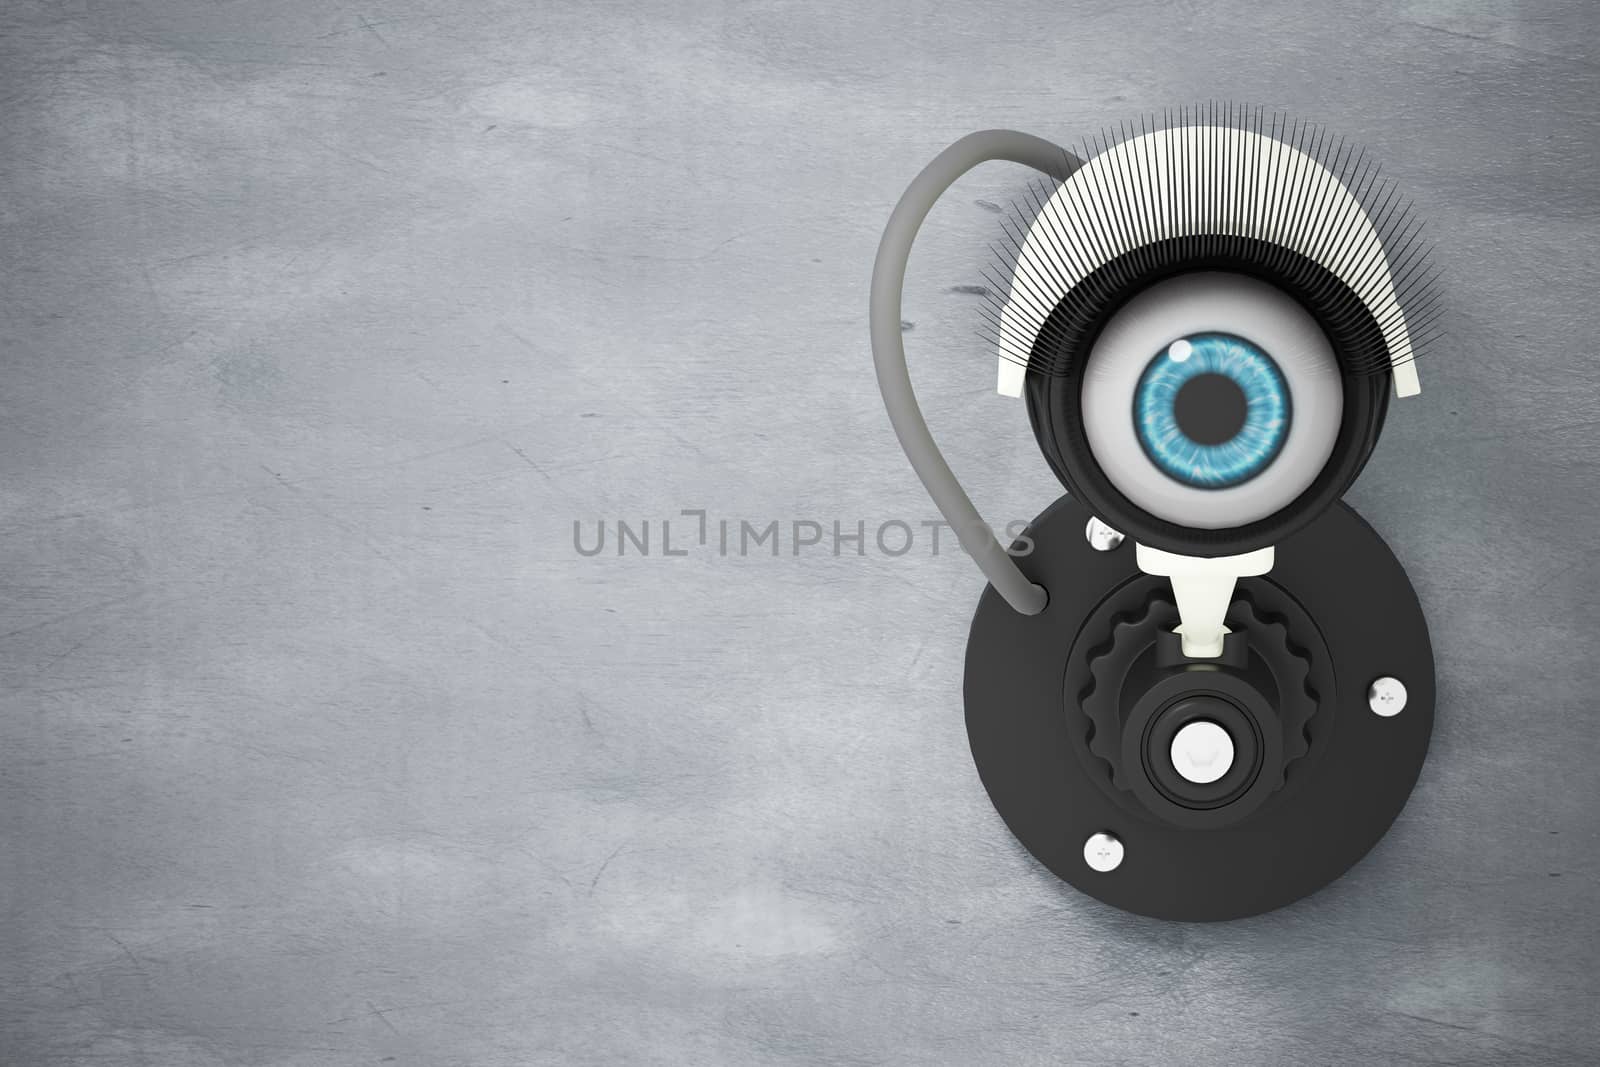 The white CCTV system installed on the cement wall with the eyes instead of the camera lens. The concept of security surveillance is like watching it all the time. 3D illustration rendering.